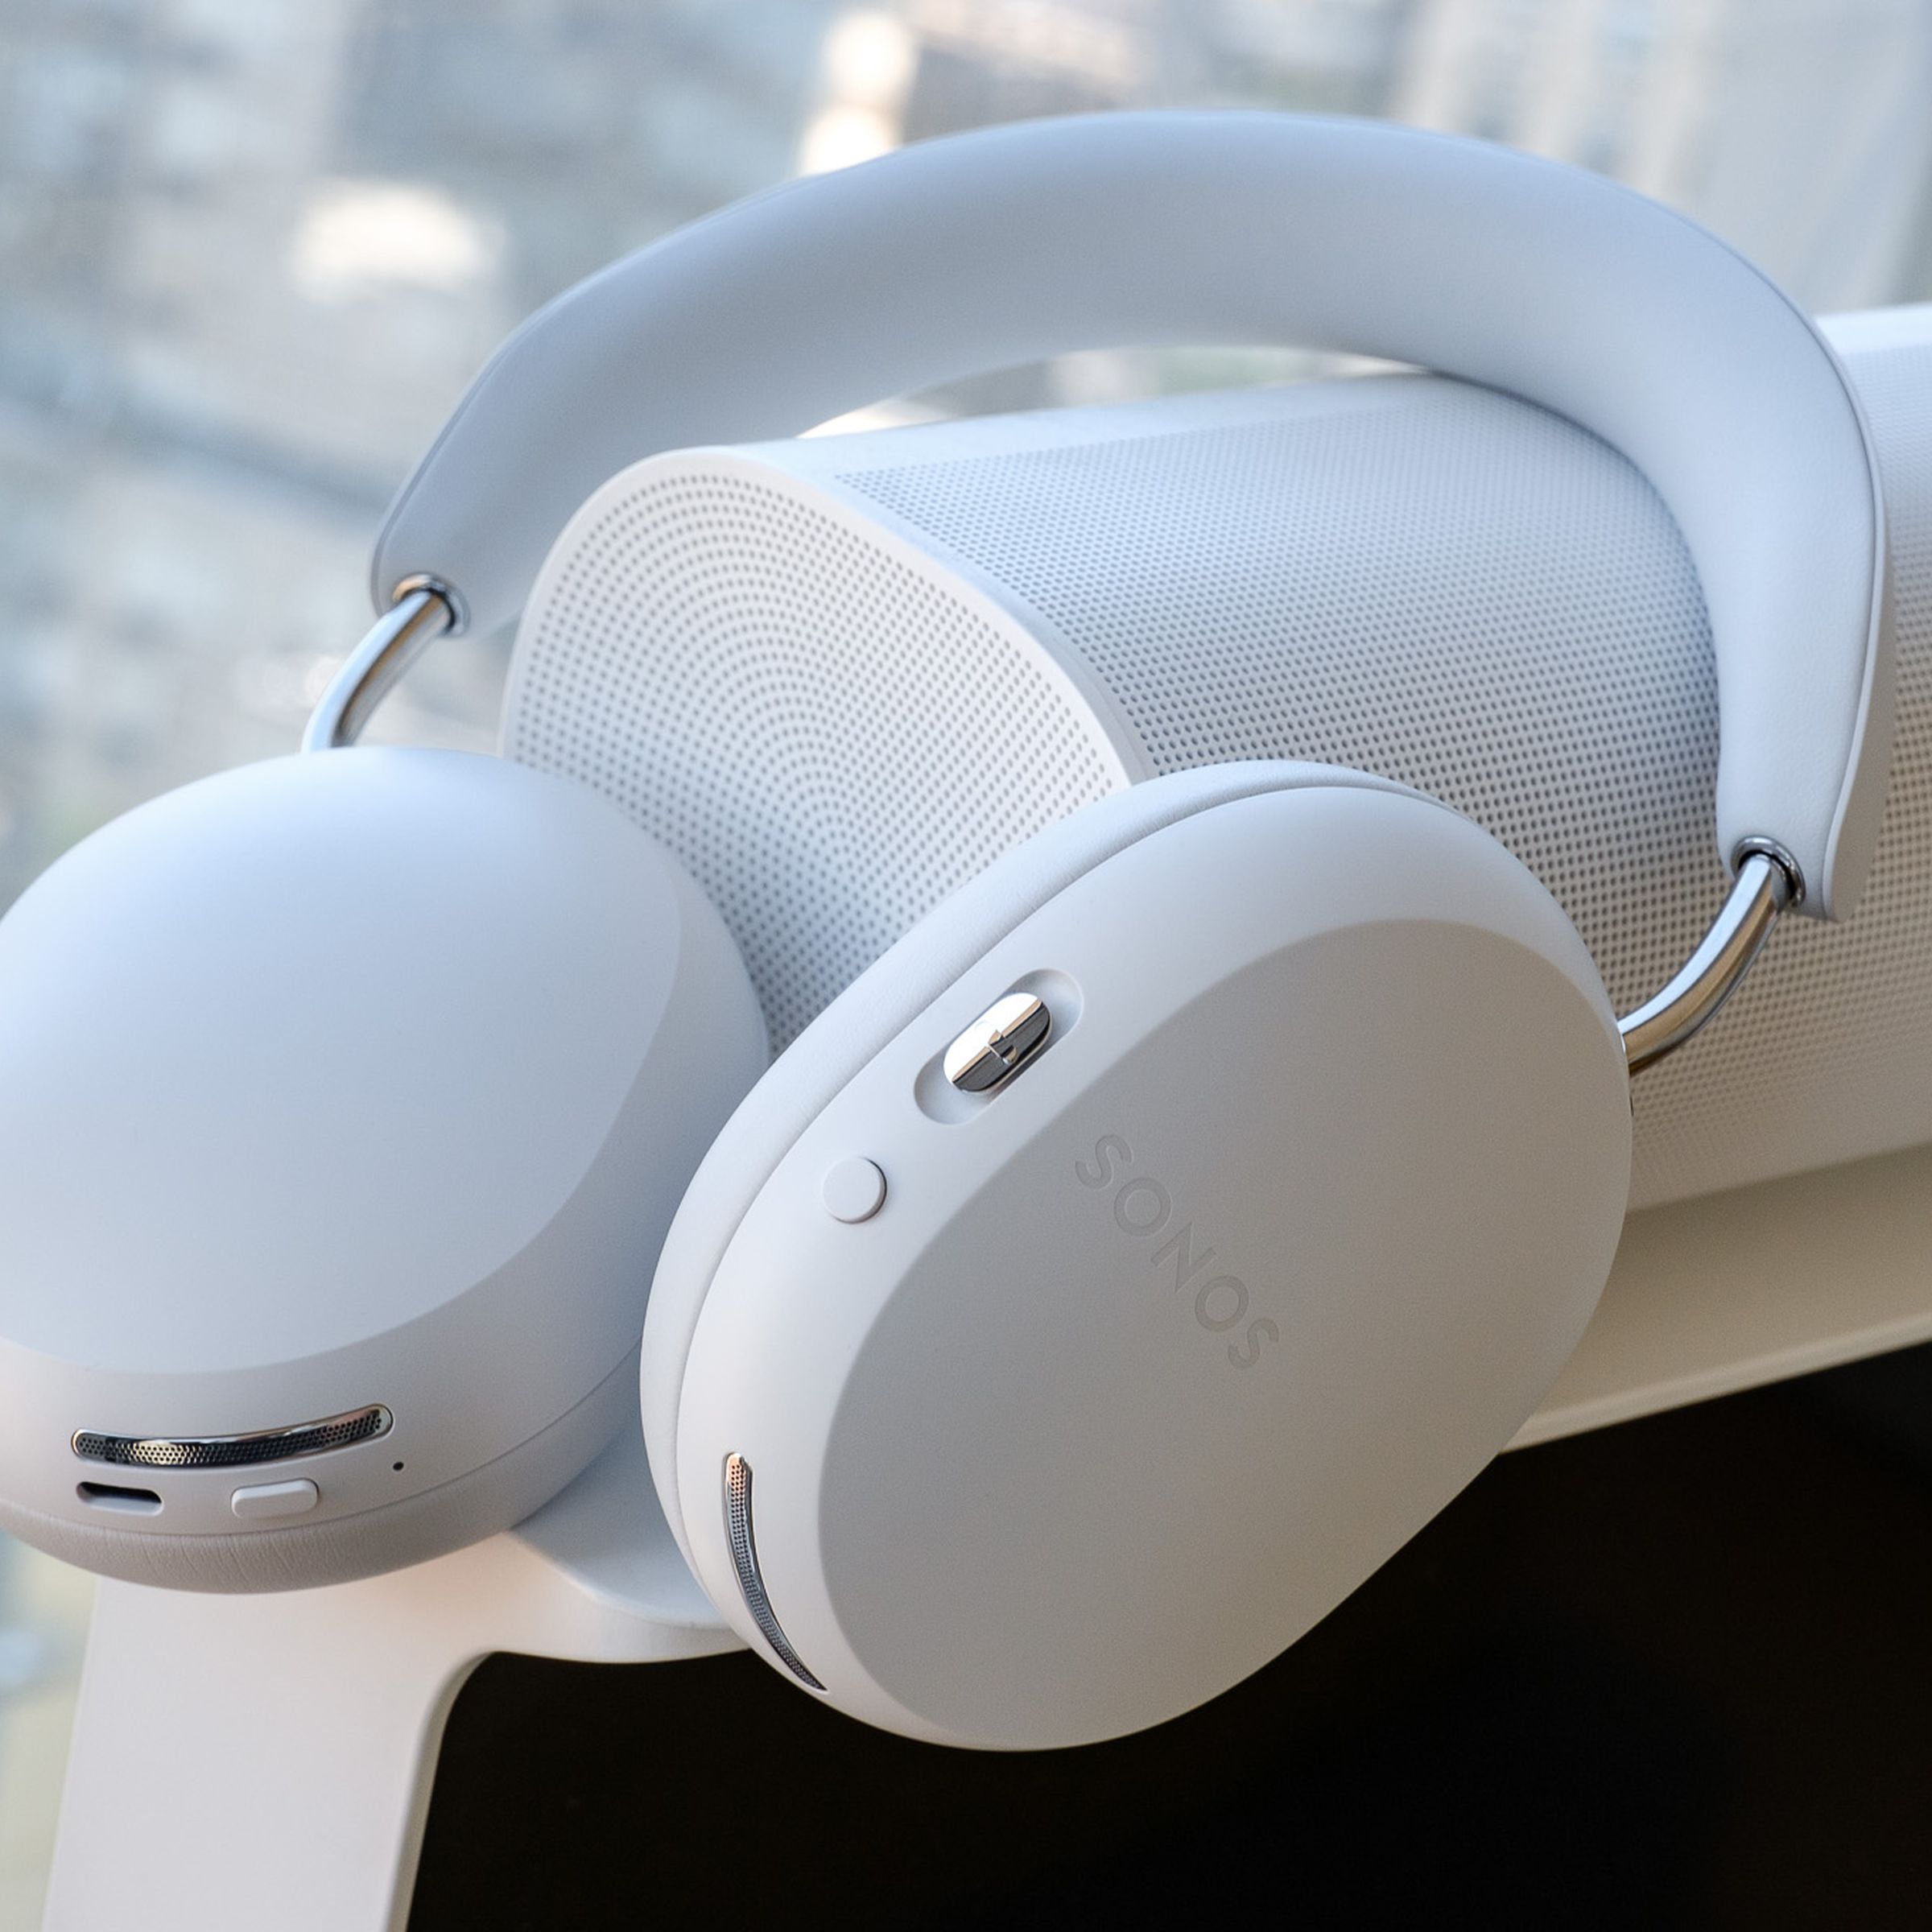 A photo of the Sonos Ace wireless headphones.